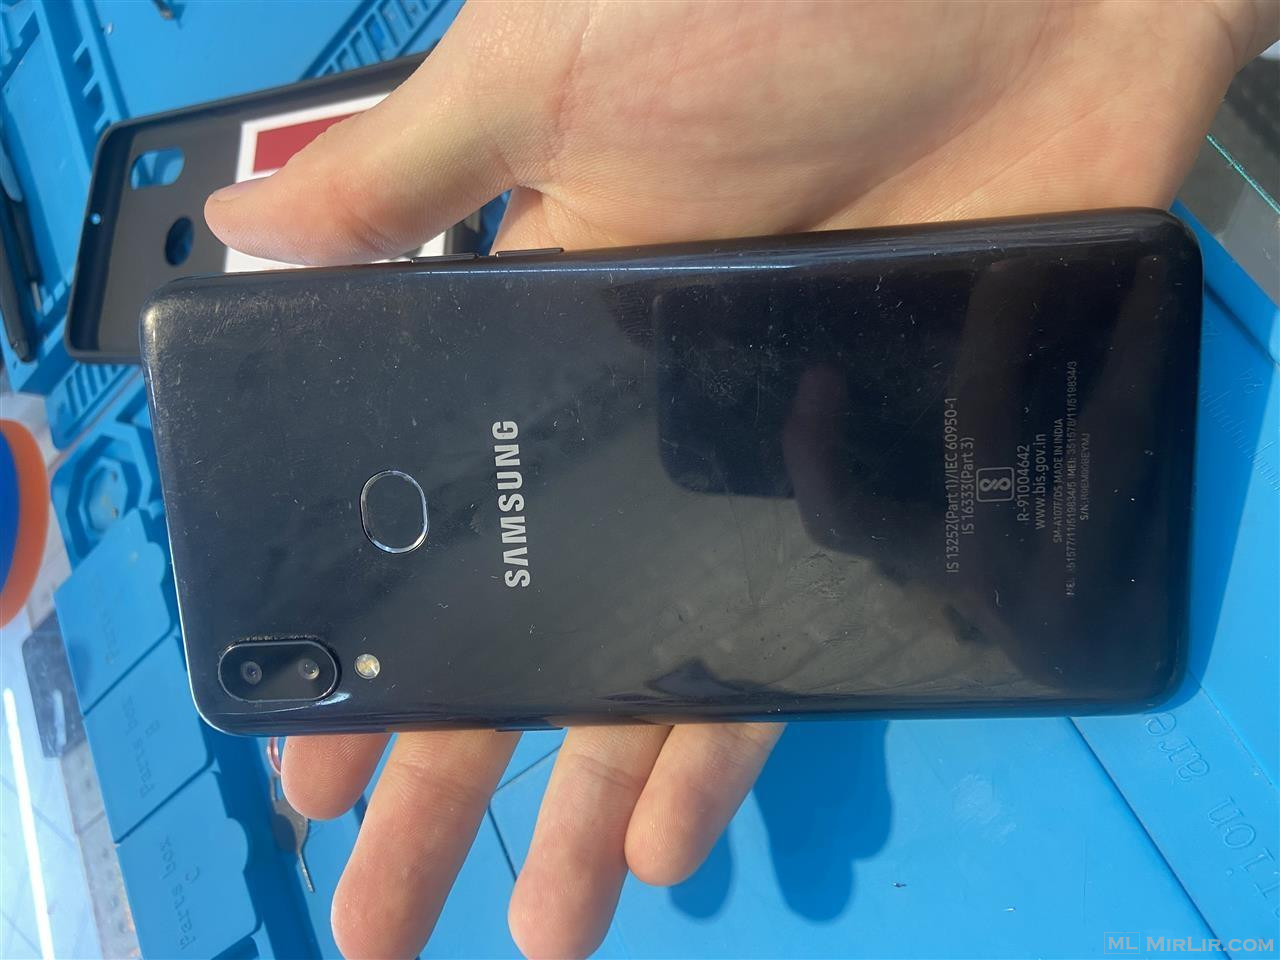 Shes samsung a10s